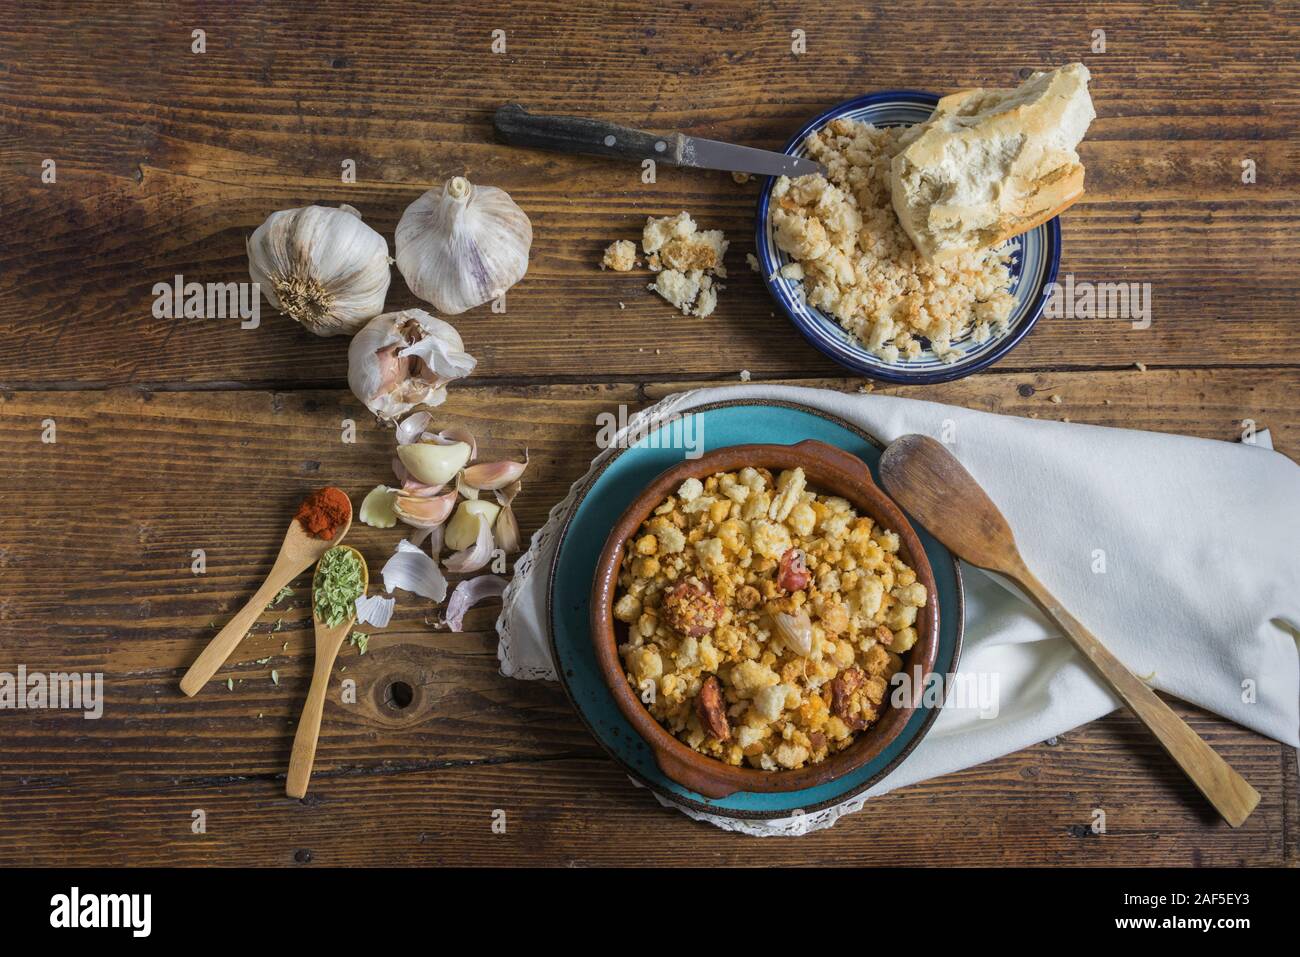 Still life with bread on a dark wooden background, crumbs with sausage. Dark food photography Stock Photo